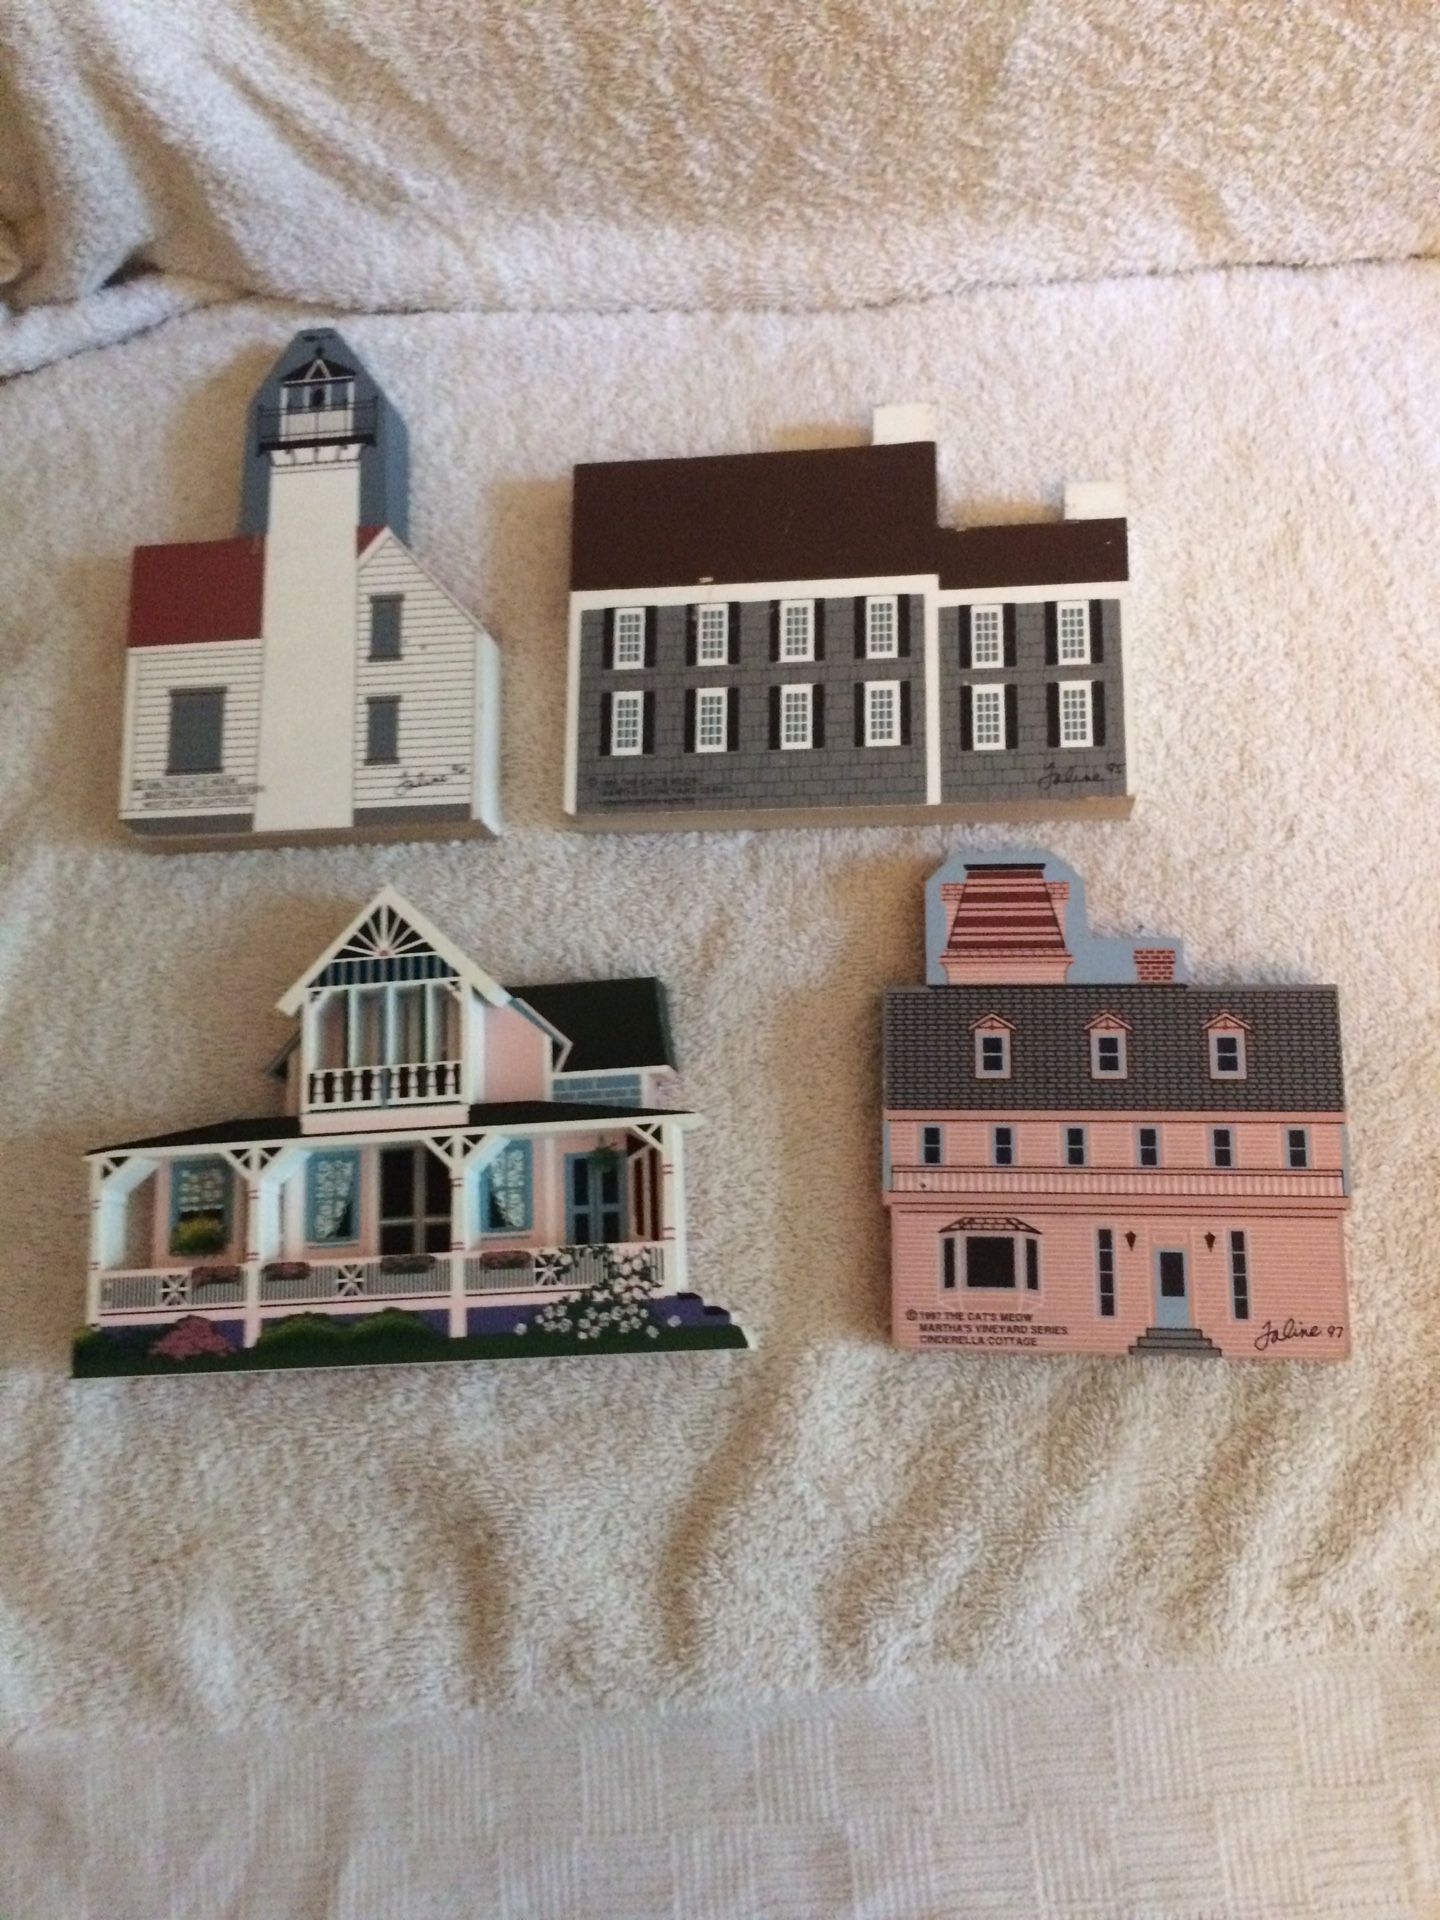 1997 The Cats Meow Martha Vineyards Series Set of 4 Cinderella's Cottage, John Coffin House, West Chop Lighthouse